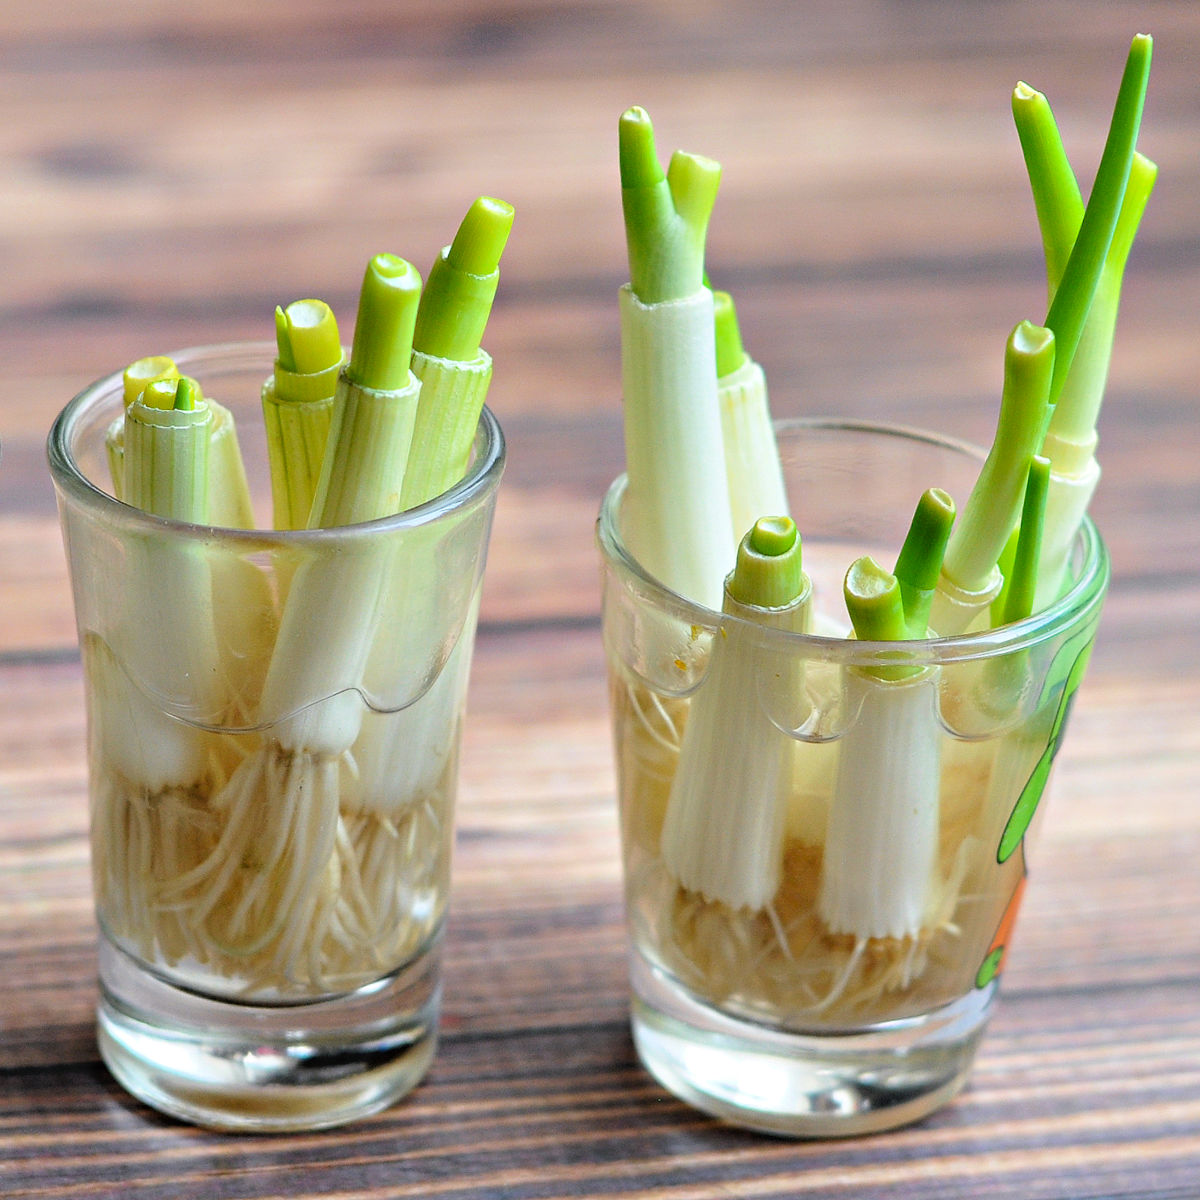 Green onions growing in shot glasses